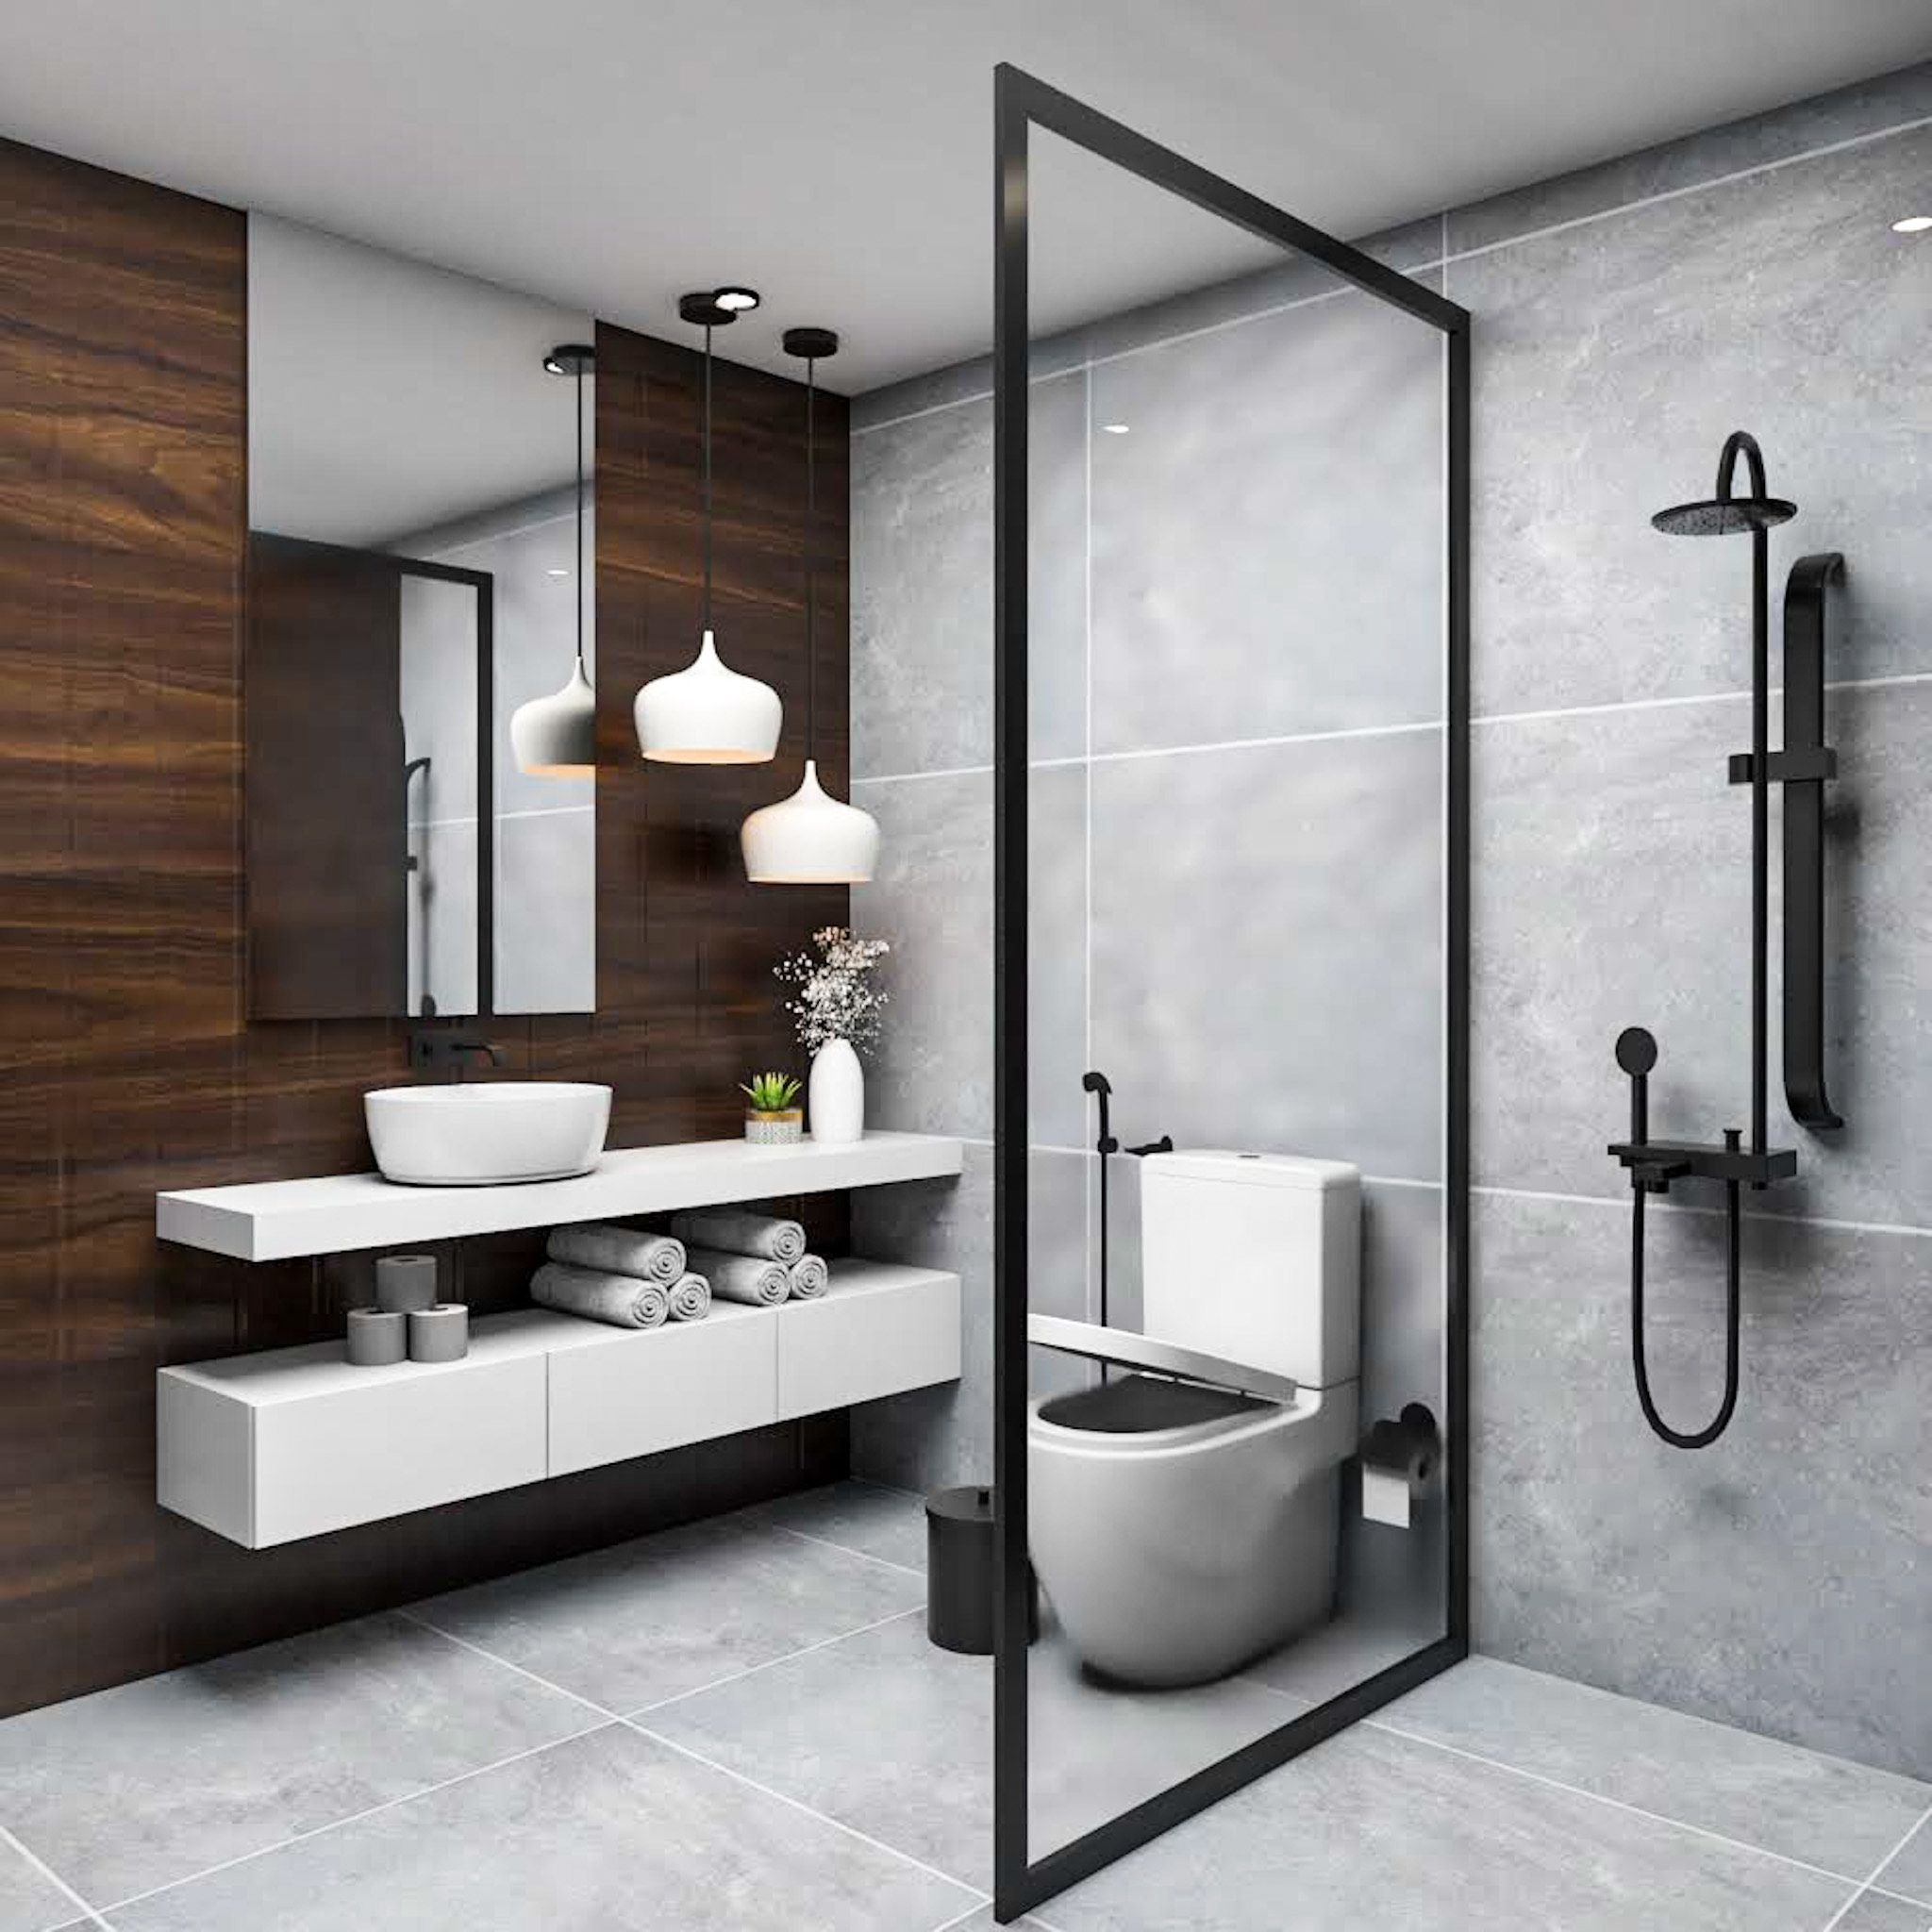 Industrial Grey And Wood Bathroom Design With White Bathroom Cabinet